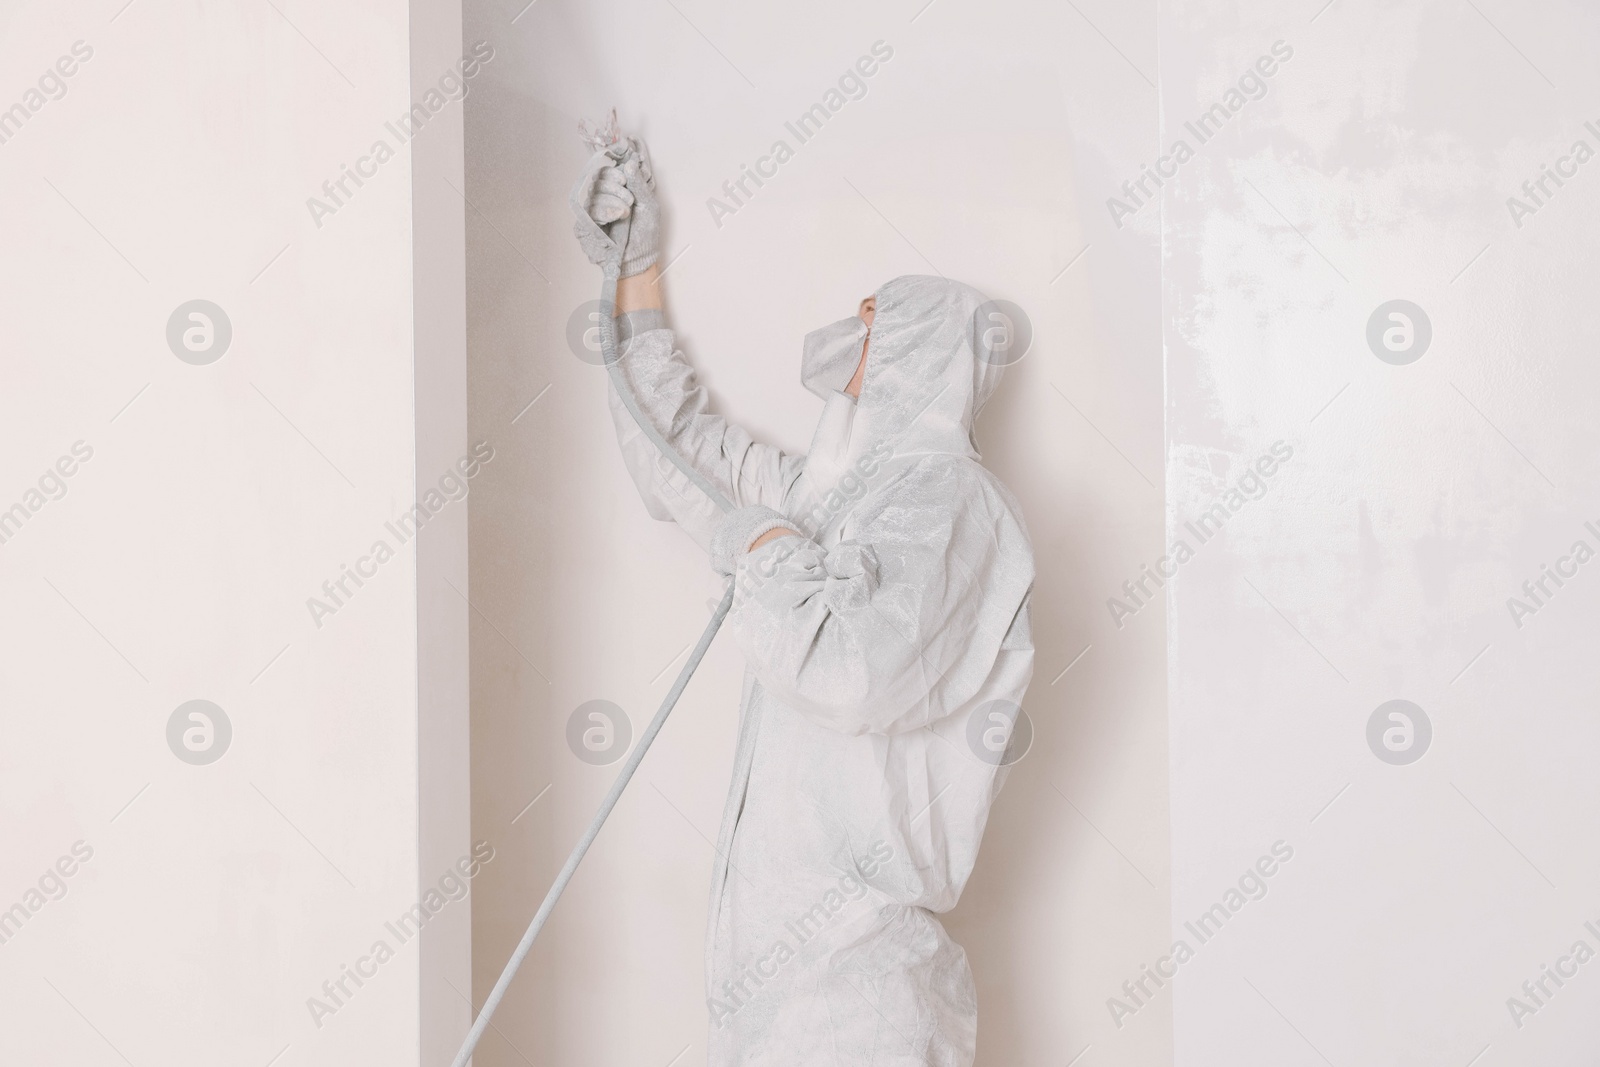 Photo of Decorator in uniform painting wall with sprayer indoors